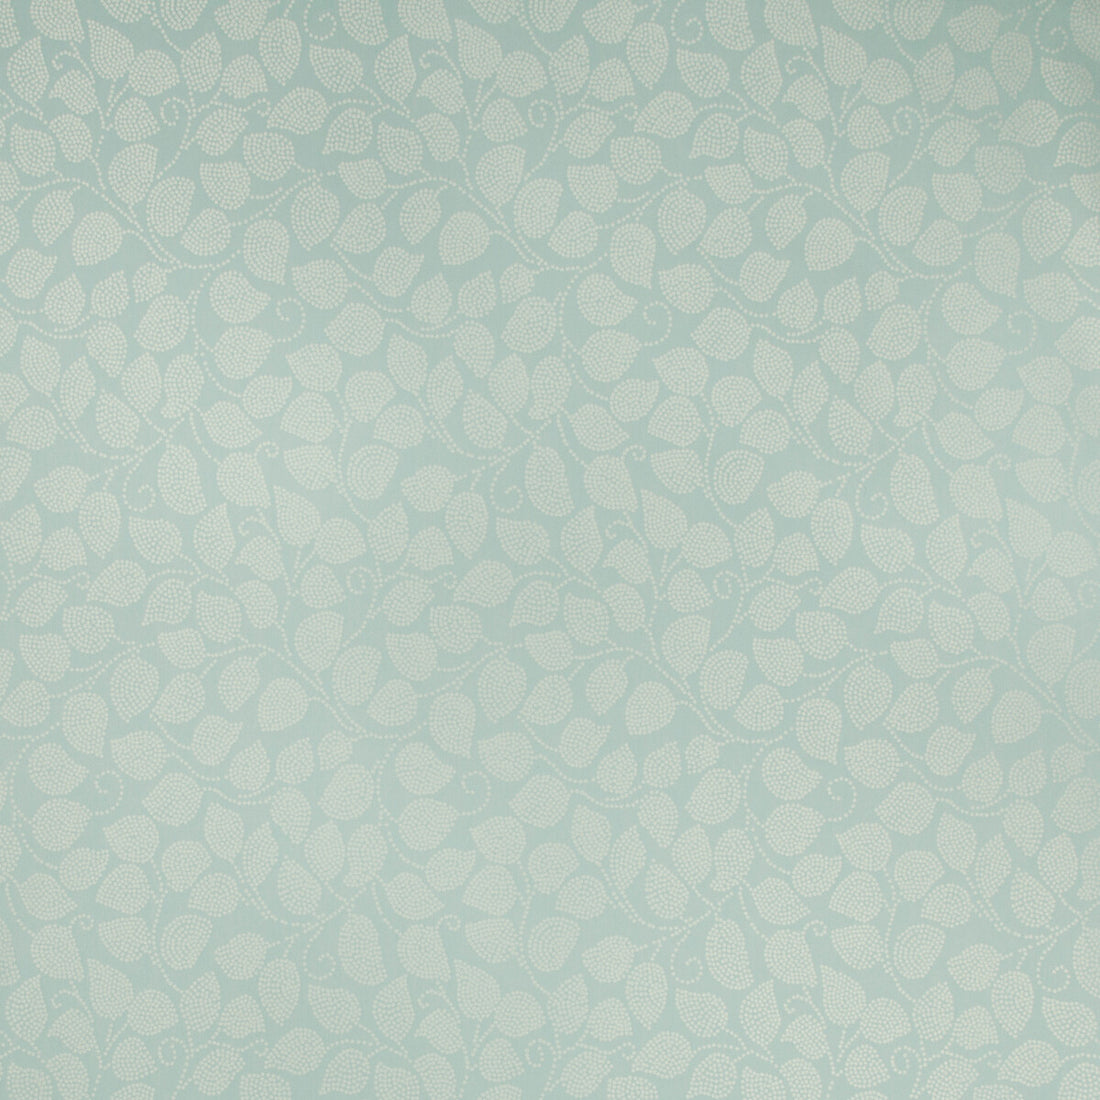 Dotted Leaves fabric in santorini color - pattern 4627.15.0 - by Kravet Contract in the Privacy Curtains collection